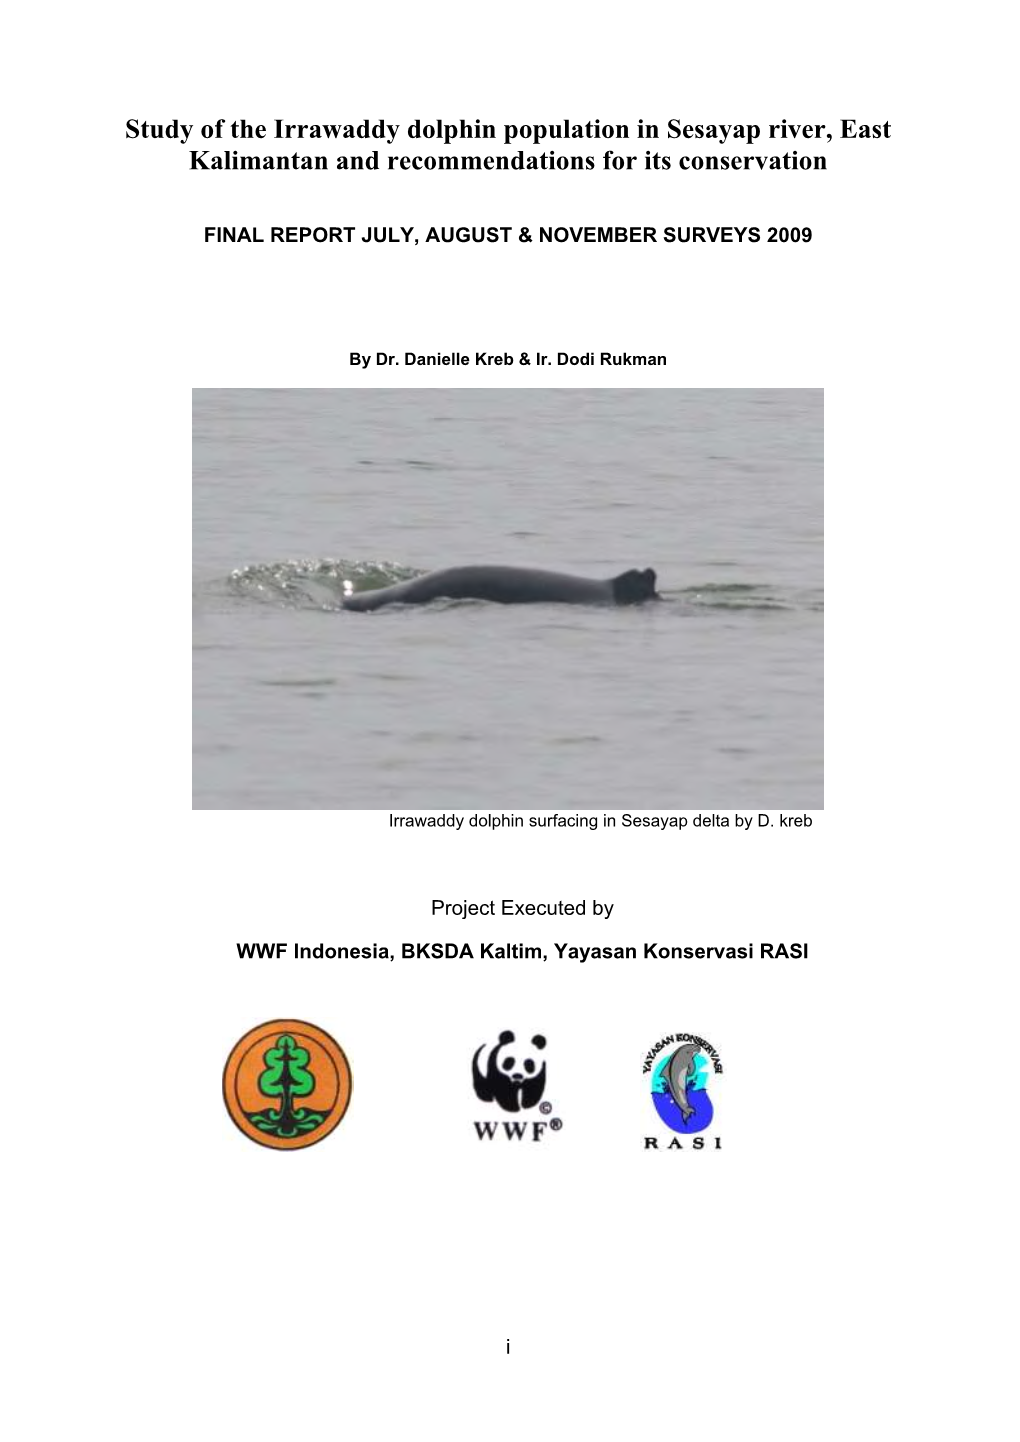 Study of the Irrawaddy Dolphin Population in Sesayap River, East Kalimantan and Recommendations for Its Conservation